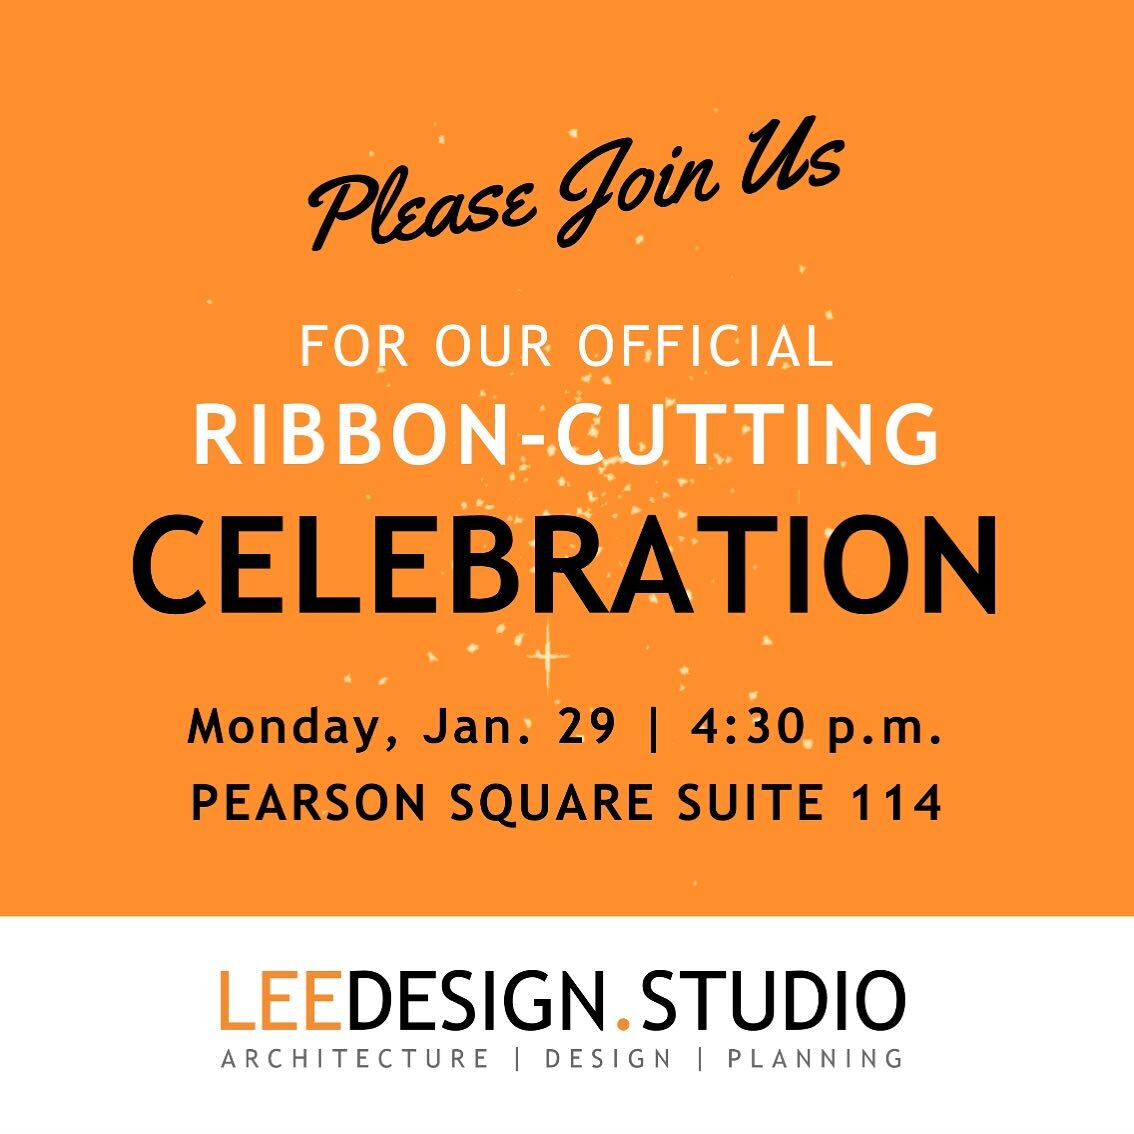 On Monday, we will be hosting local city leaders for a ribbon-cutting ceremony with the Falls Church Chamber @livelocalfc. We are excited to officially be welcomed to the neighborhood, and are looking forward to serving and engaging with our local co